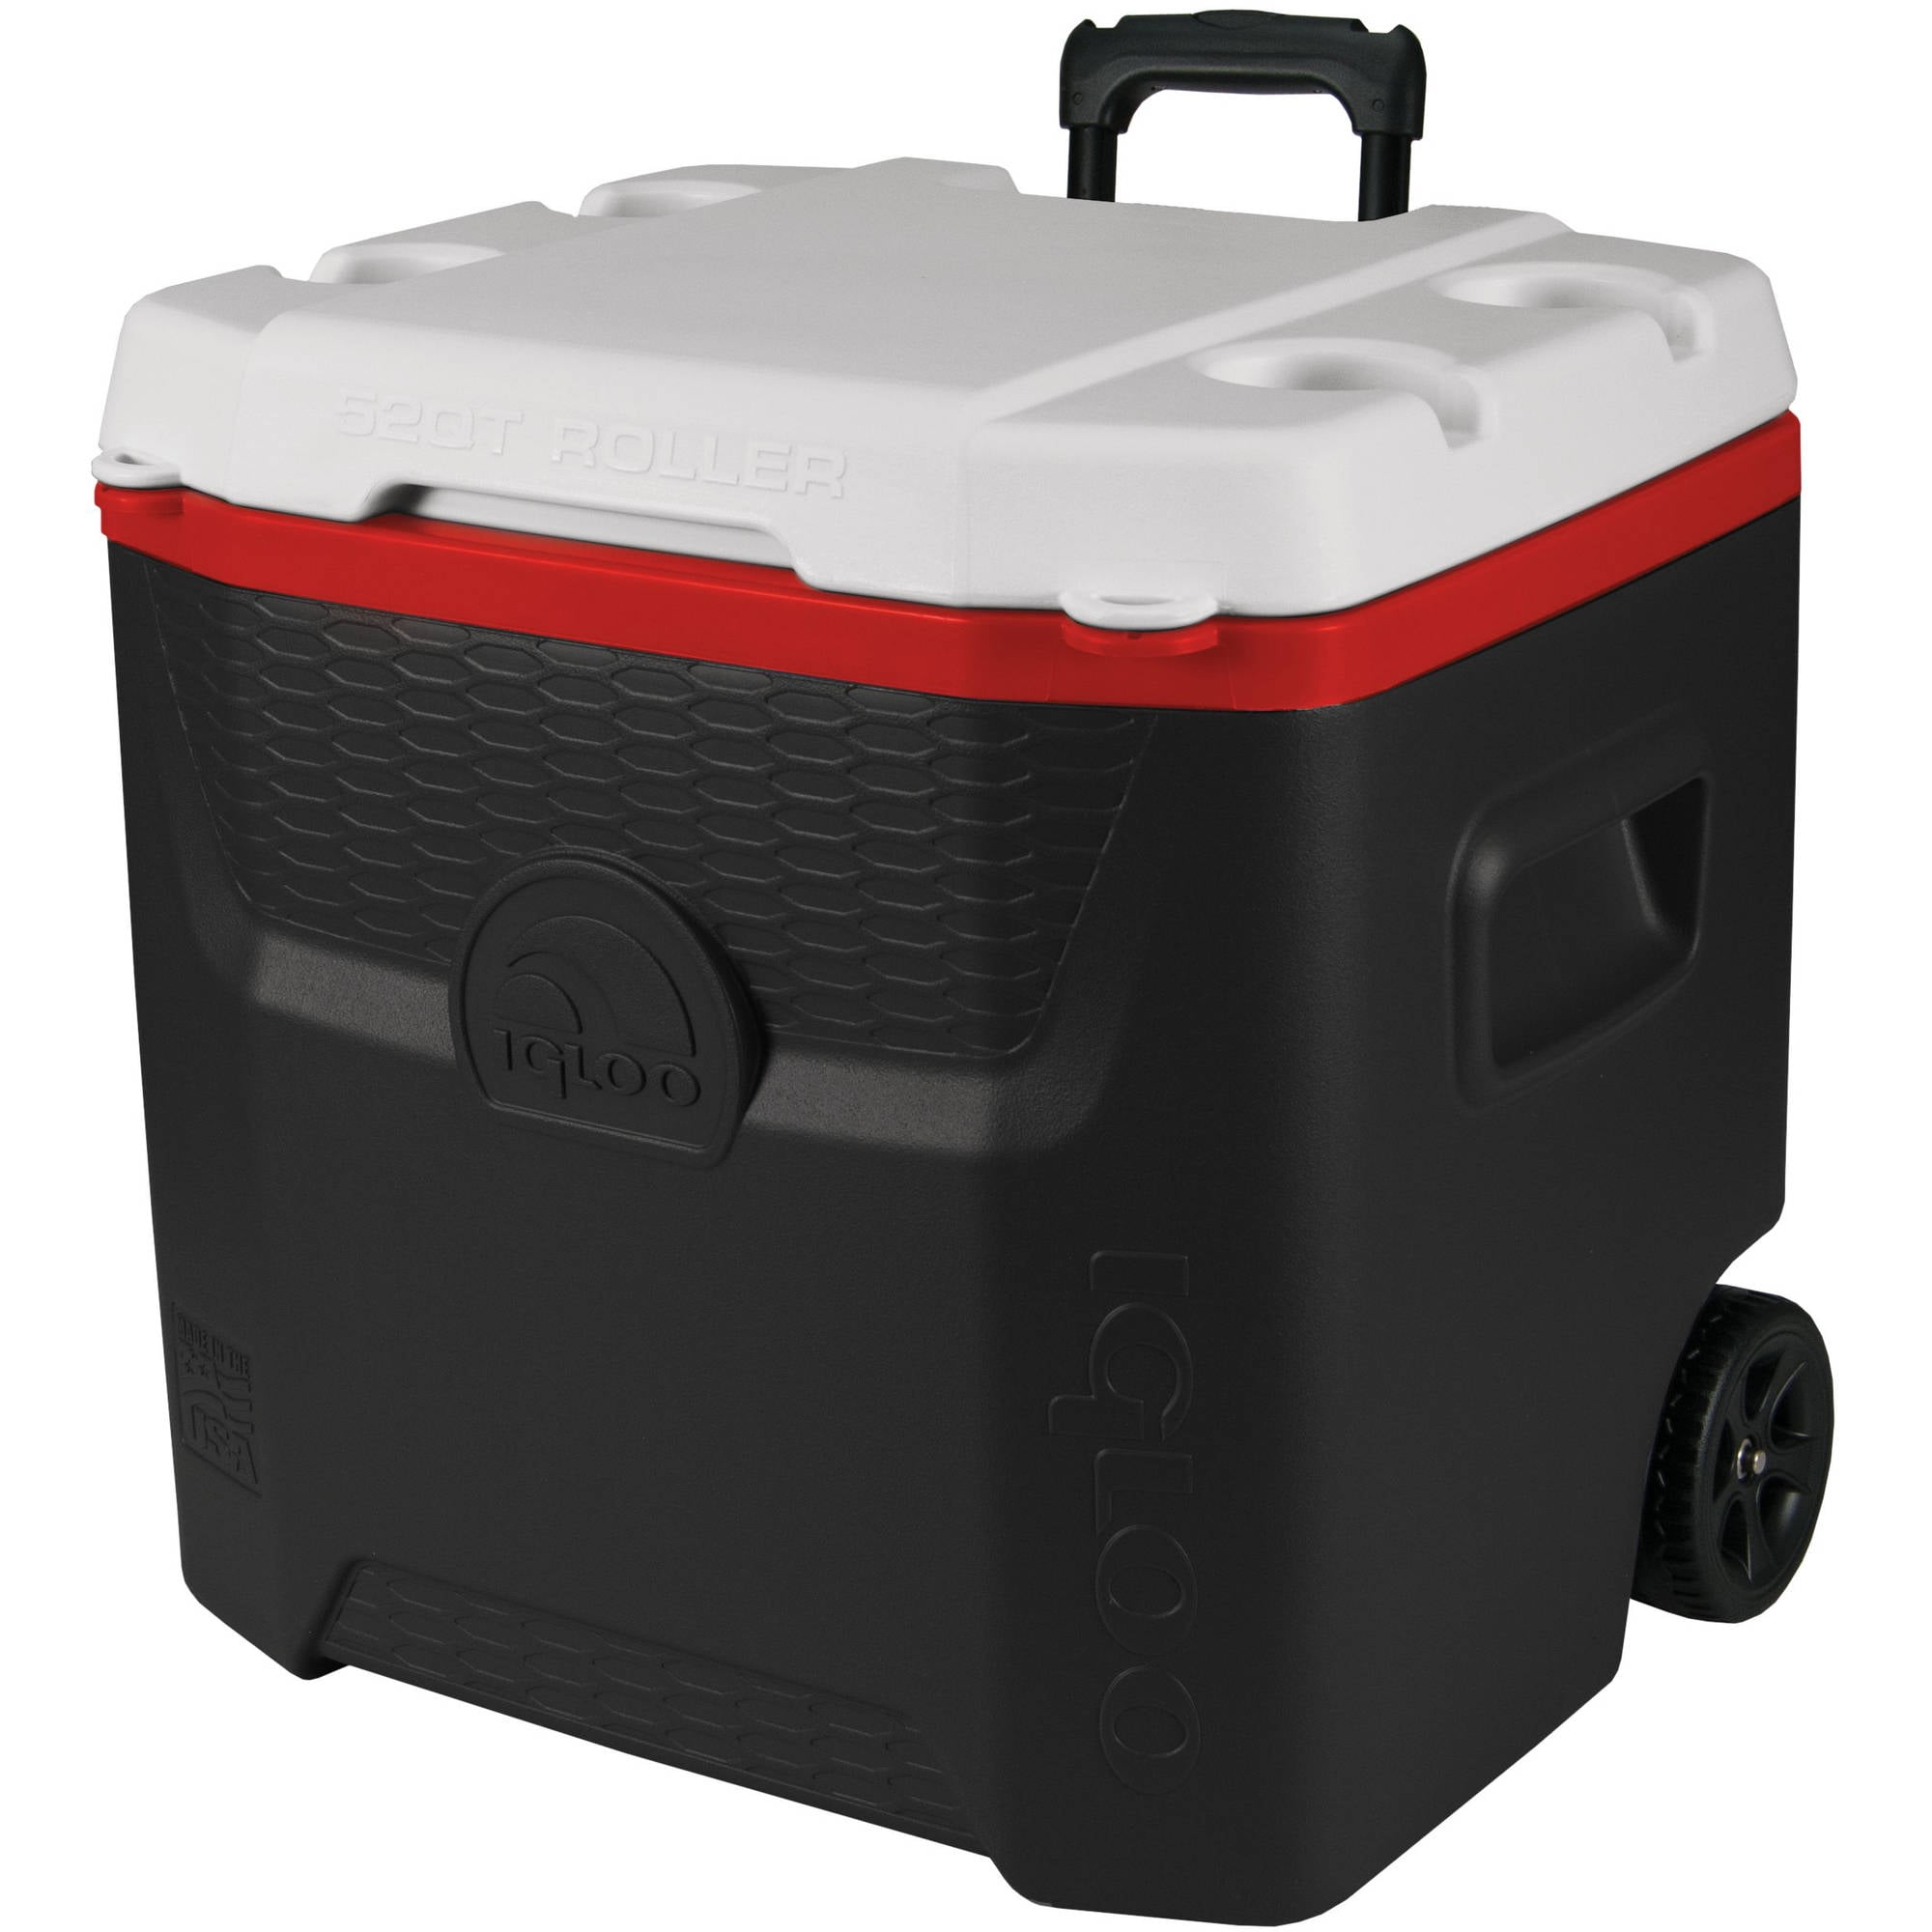 igloo rolling ice chest